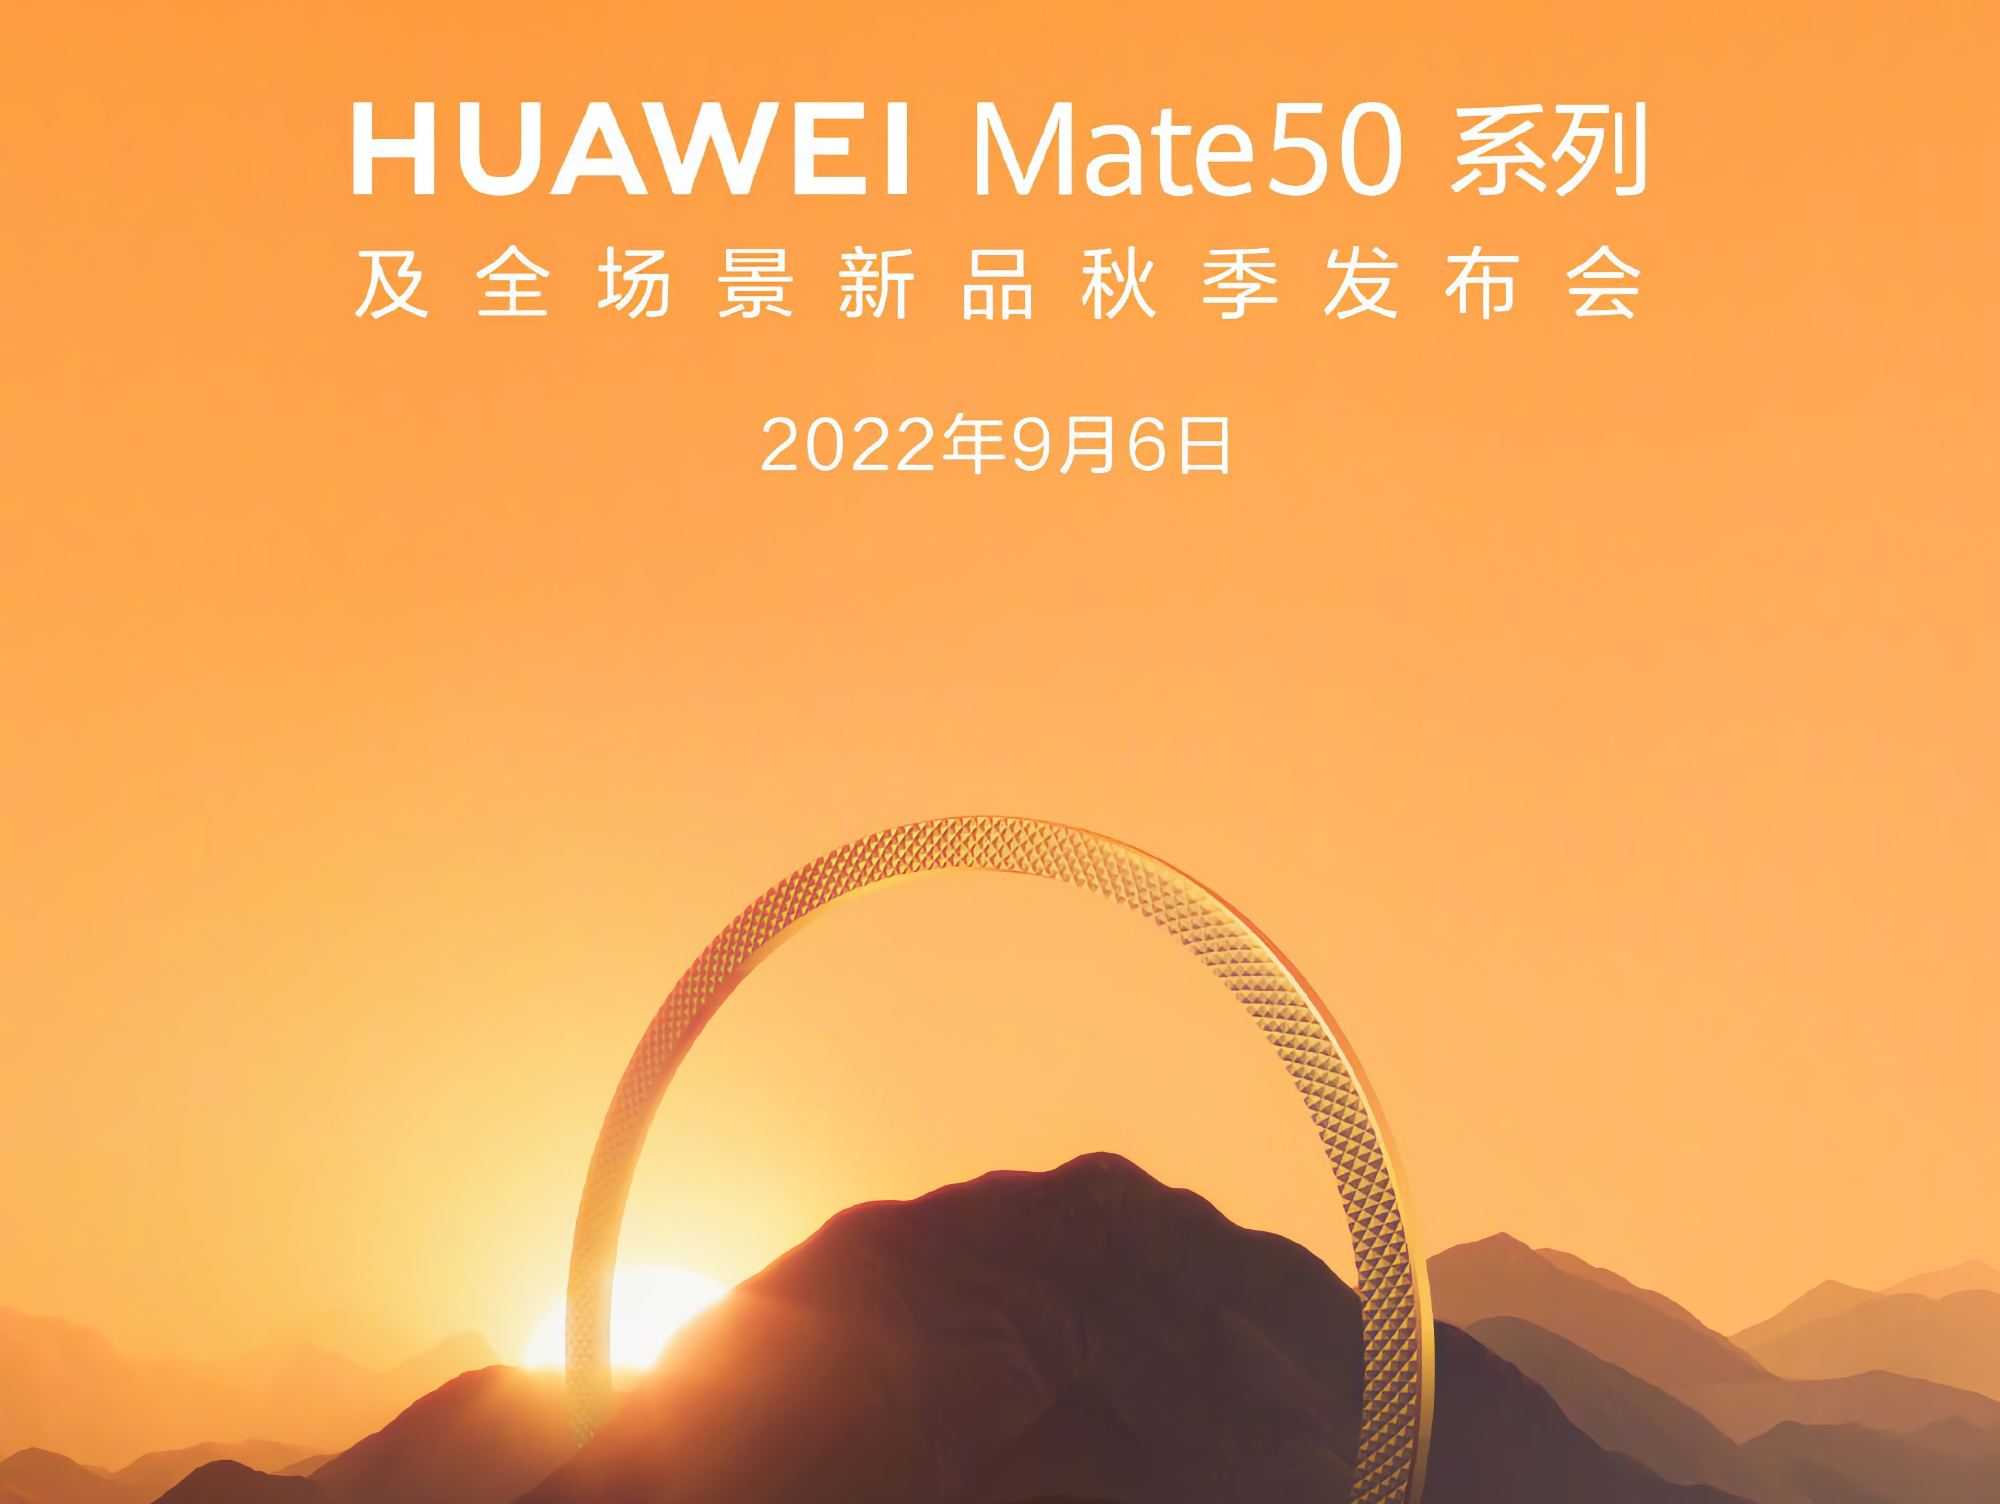 It's official: the flagship line of smartphones Huawei Mate 50 will be presented on September 6